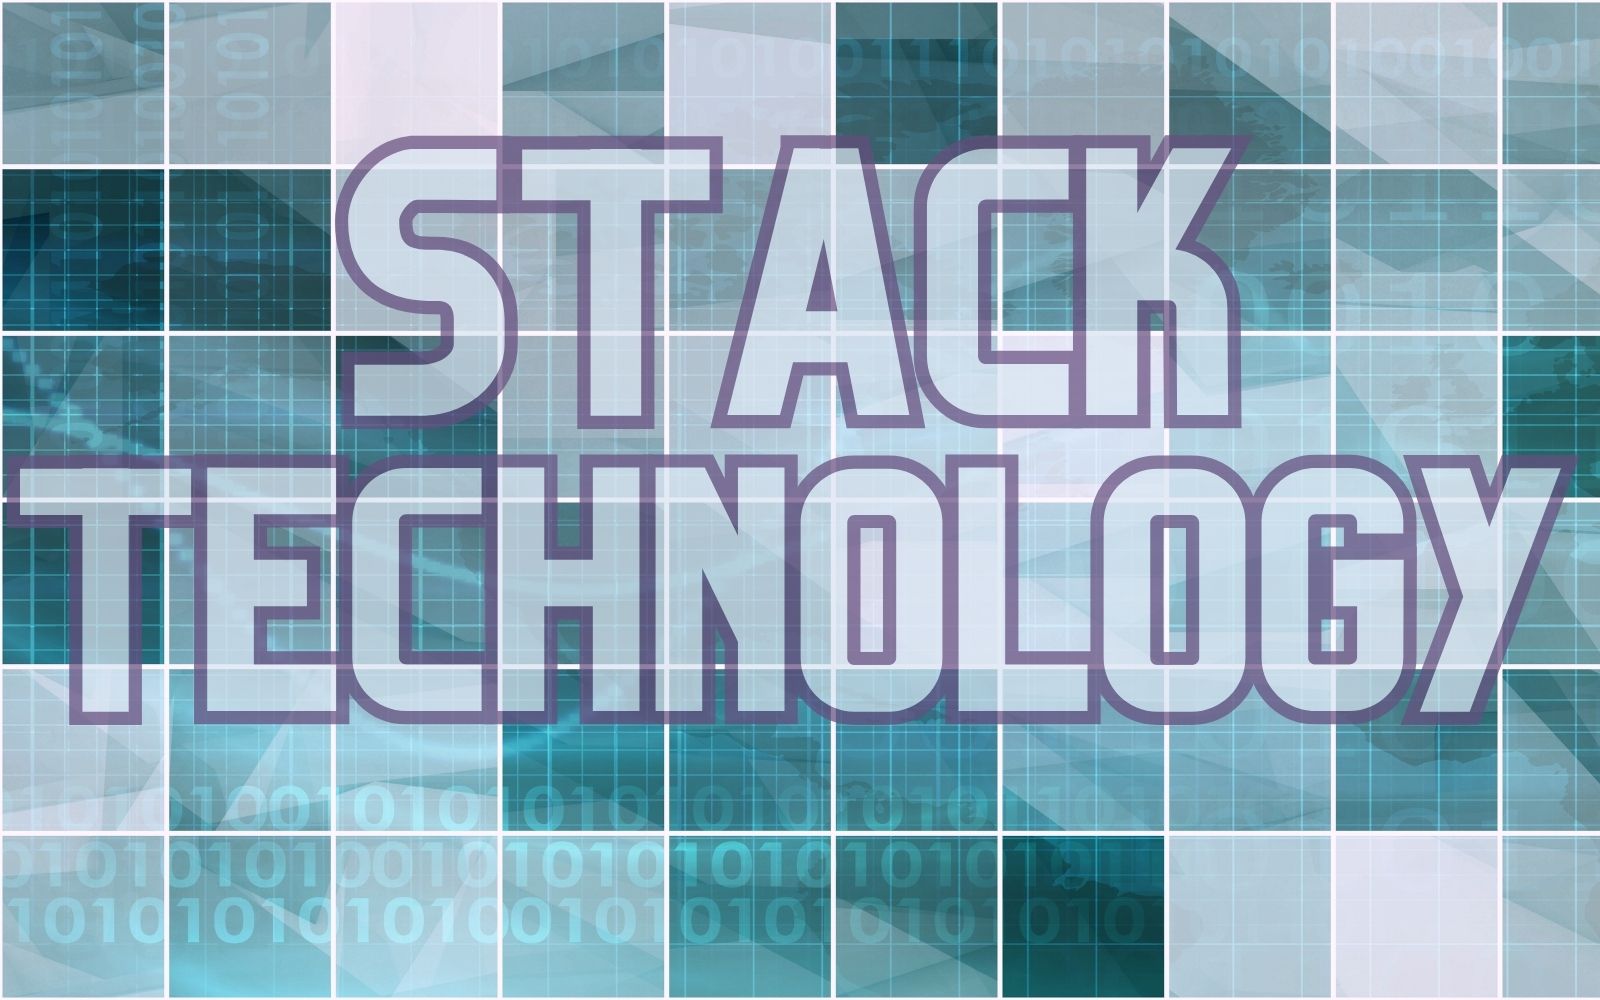 stack technology and what you need to know